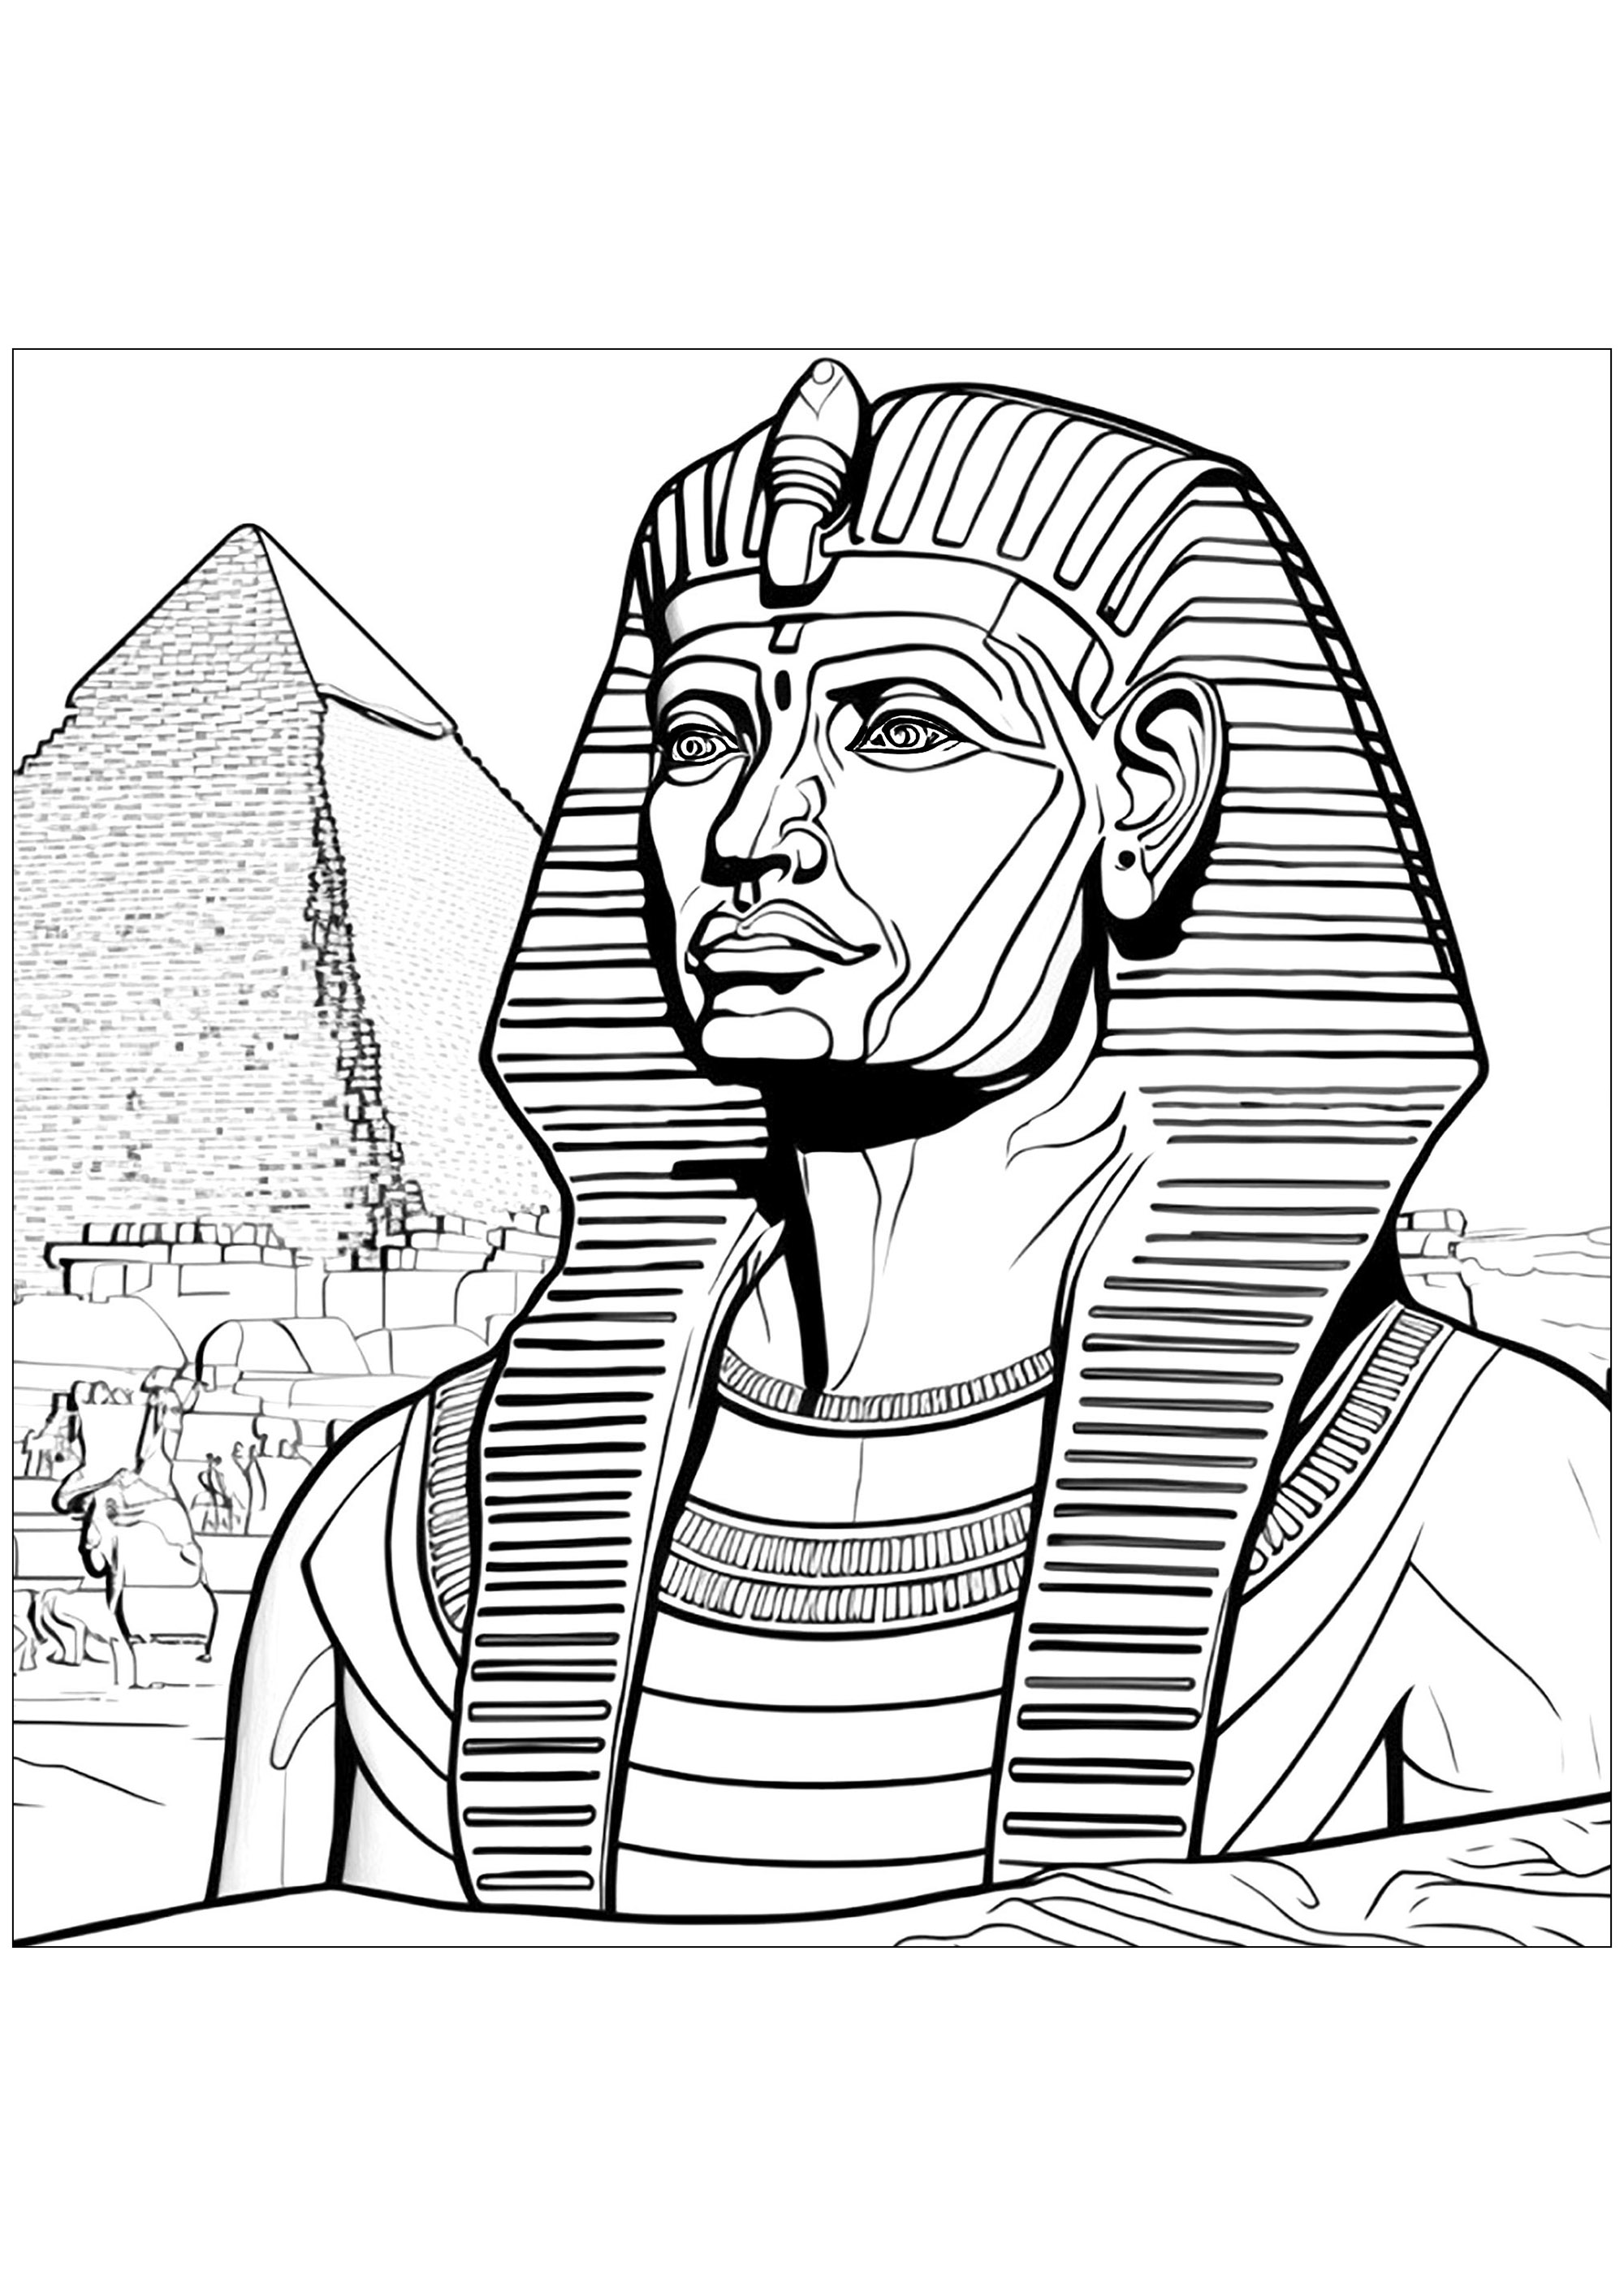 Pharaoh in front of a pyramid in Egypt. The pharaoh wears his crown, which you will have to color in bright colors.The details of the pyramid are very precise and give the coloring a majestic and realistic look.This coloring page is a great way to stimulate children's imagination and teach them about Egyptian history.